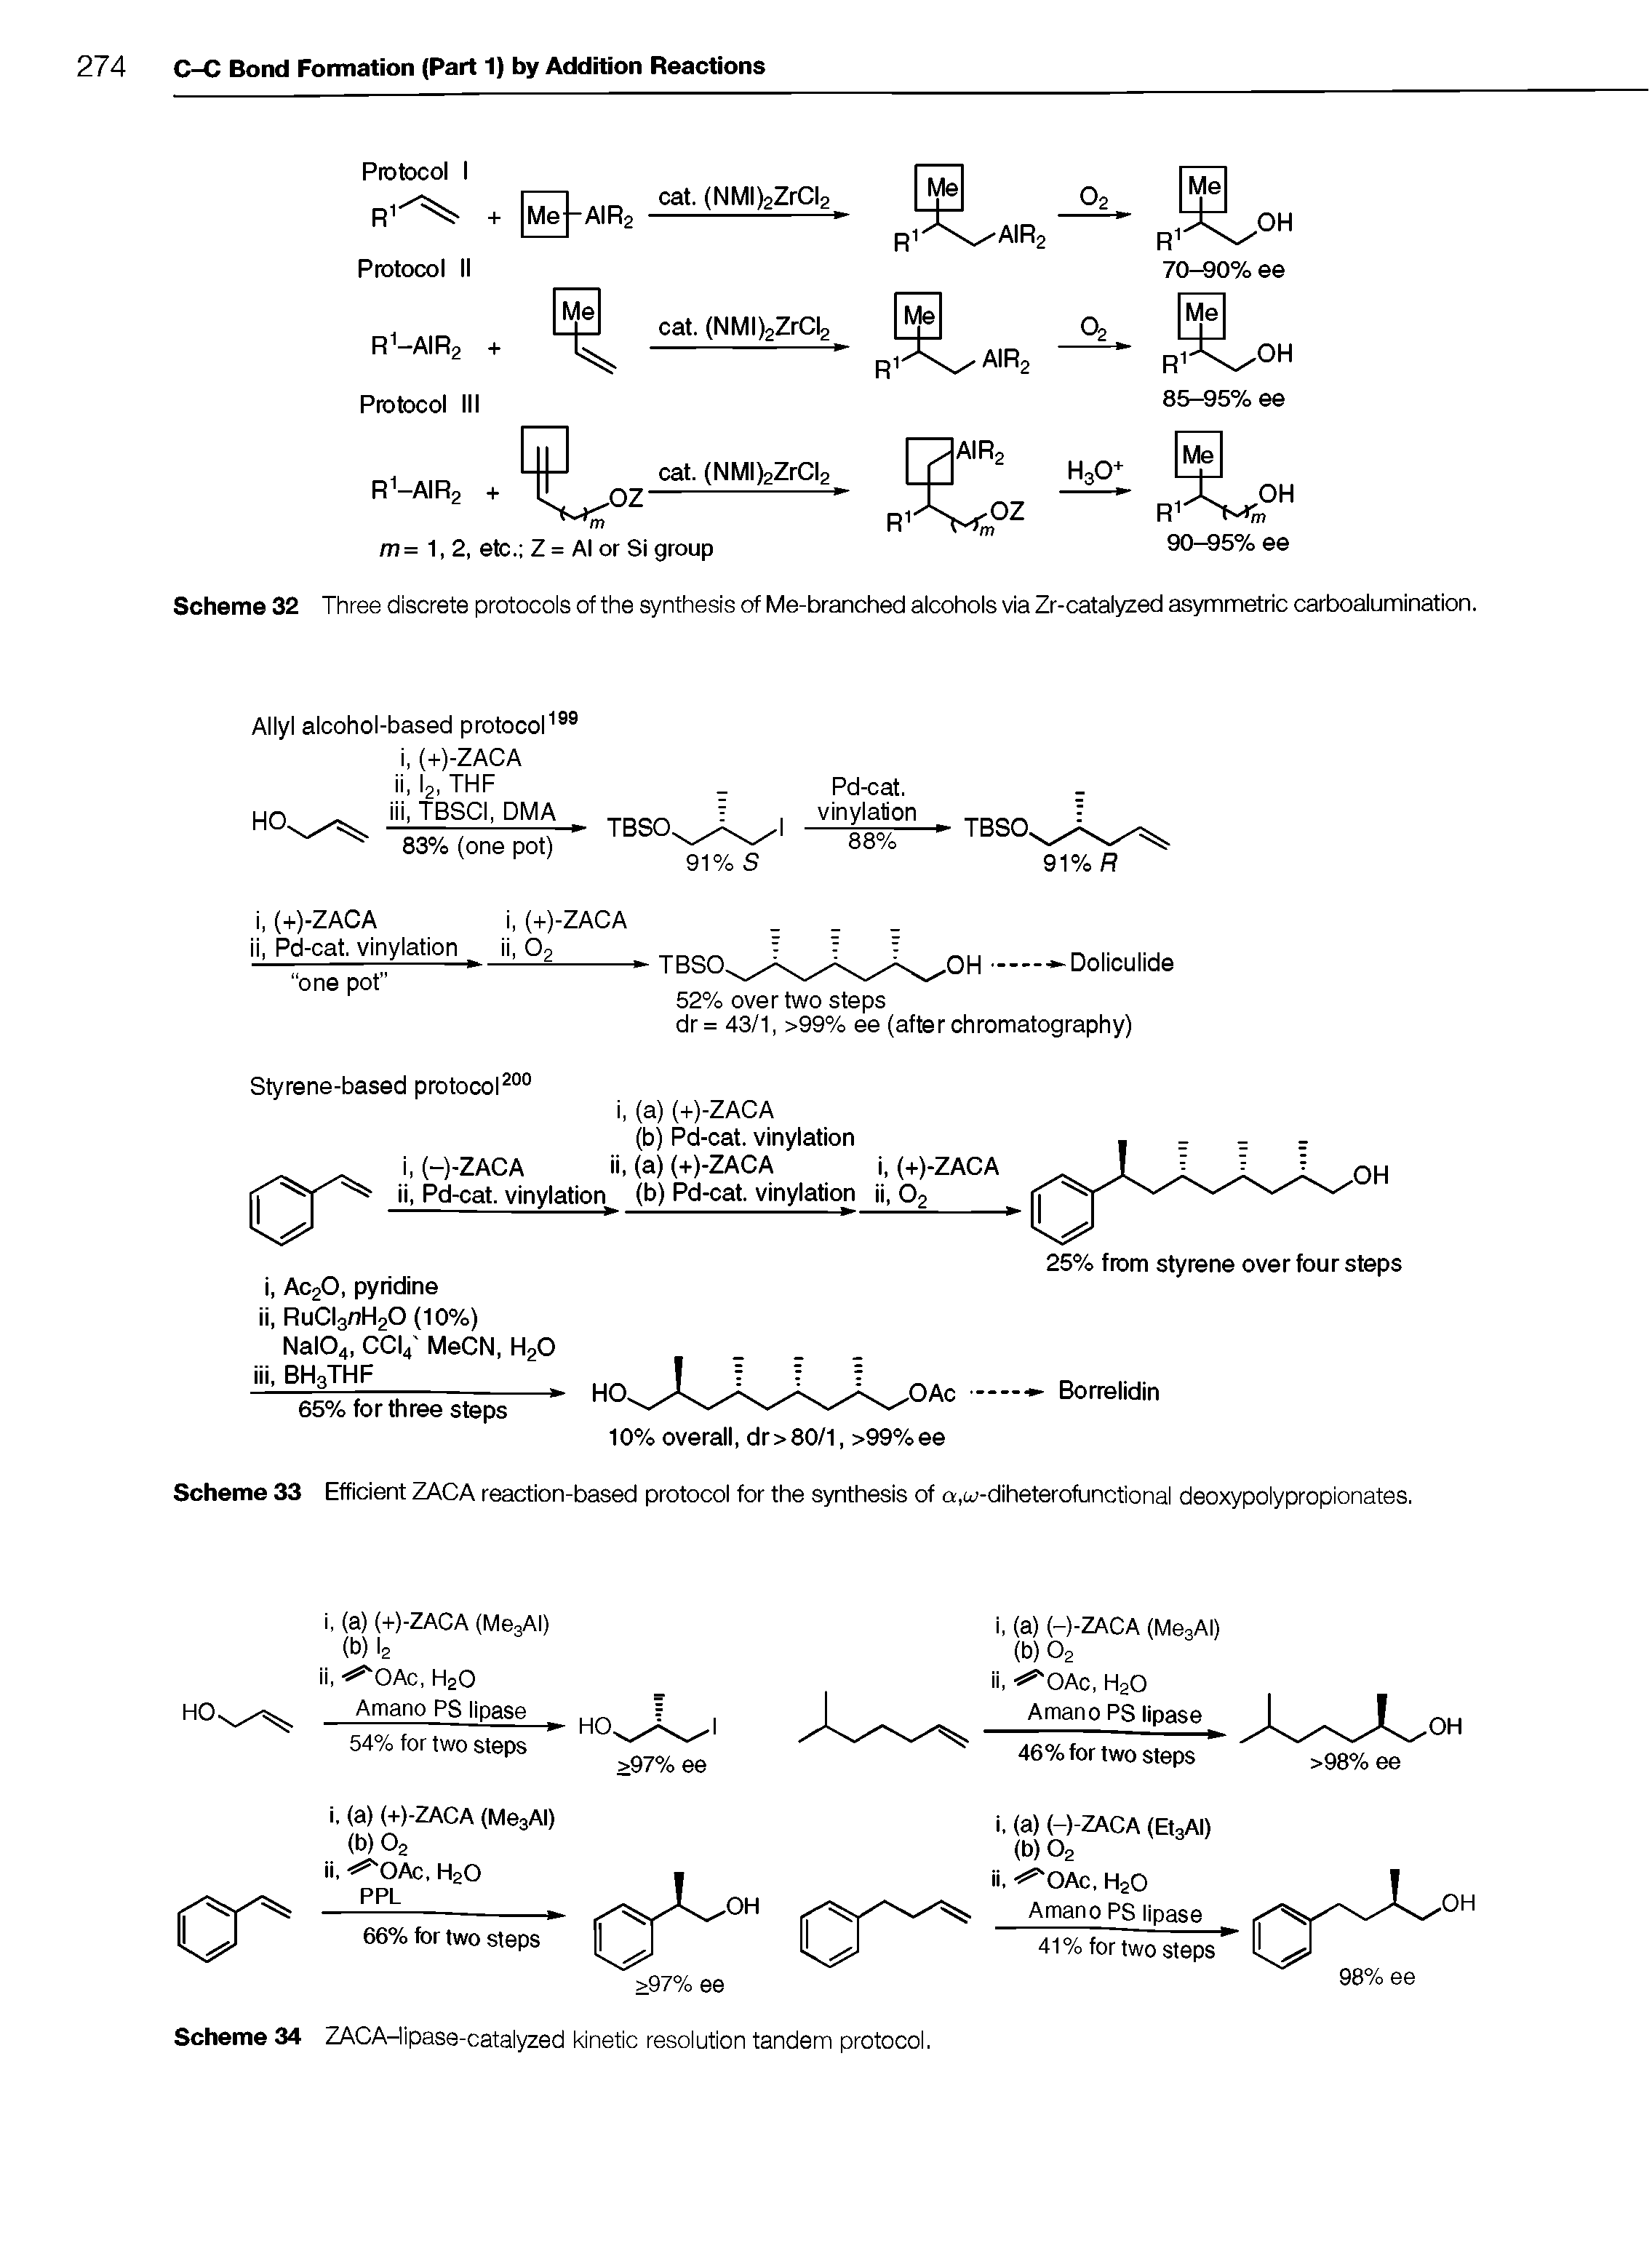 Scheme 32 Three discrete protocols of the synthesis of Me-branched alcohols via Zr-catalyzed asymmetric carboalumination.